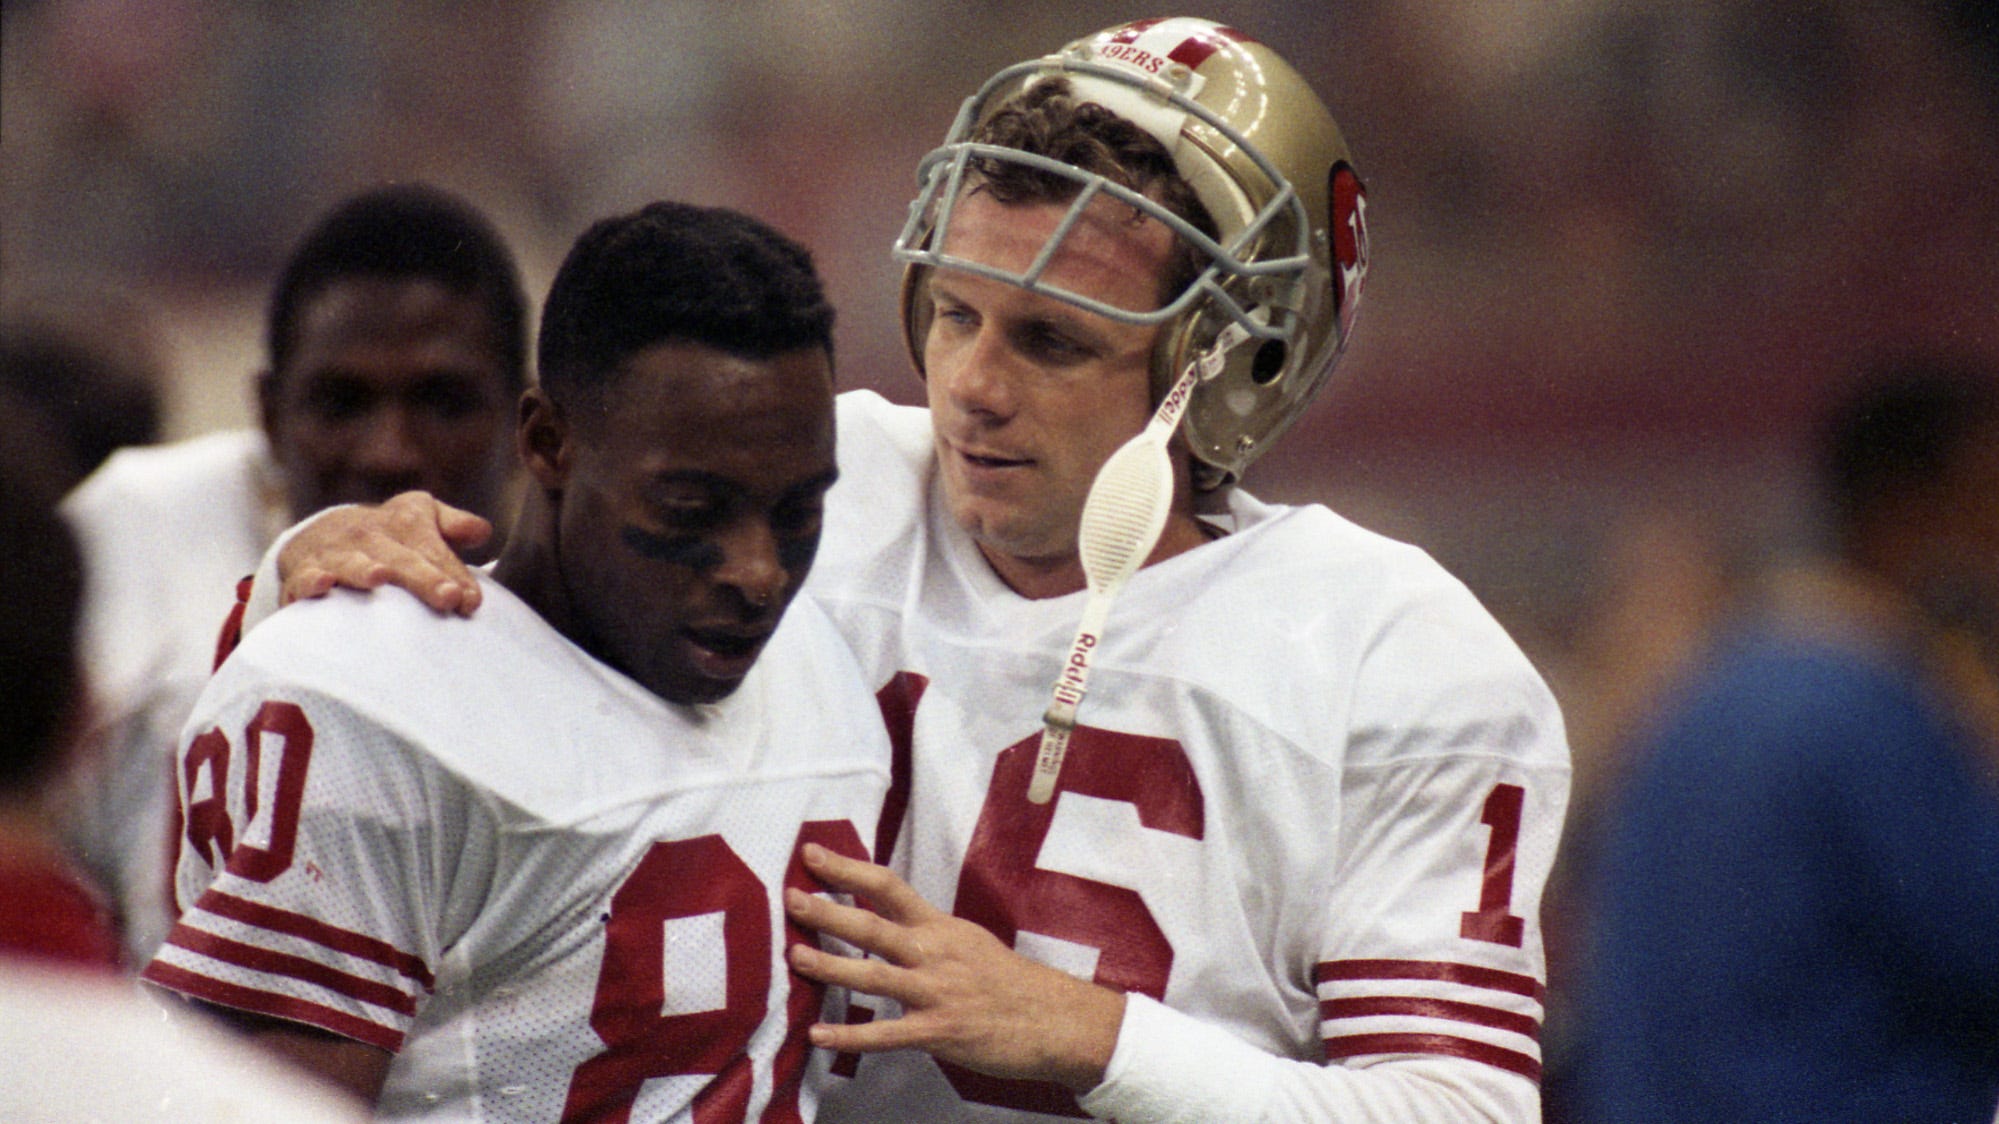 Super Bowl's 54 best players in history Where do 49ers legends rank?